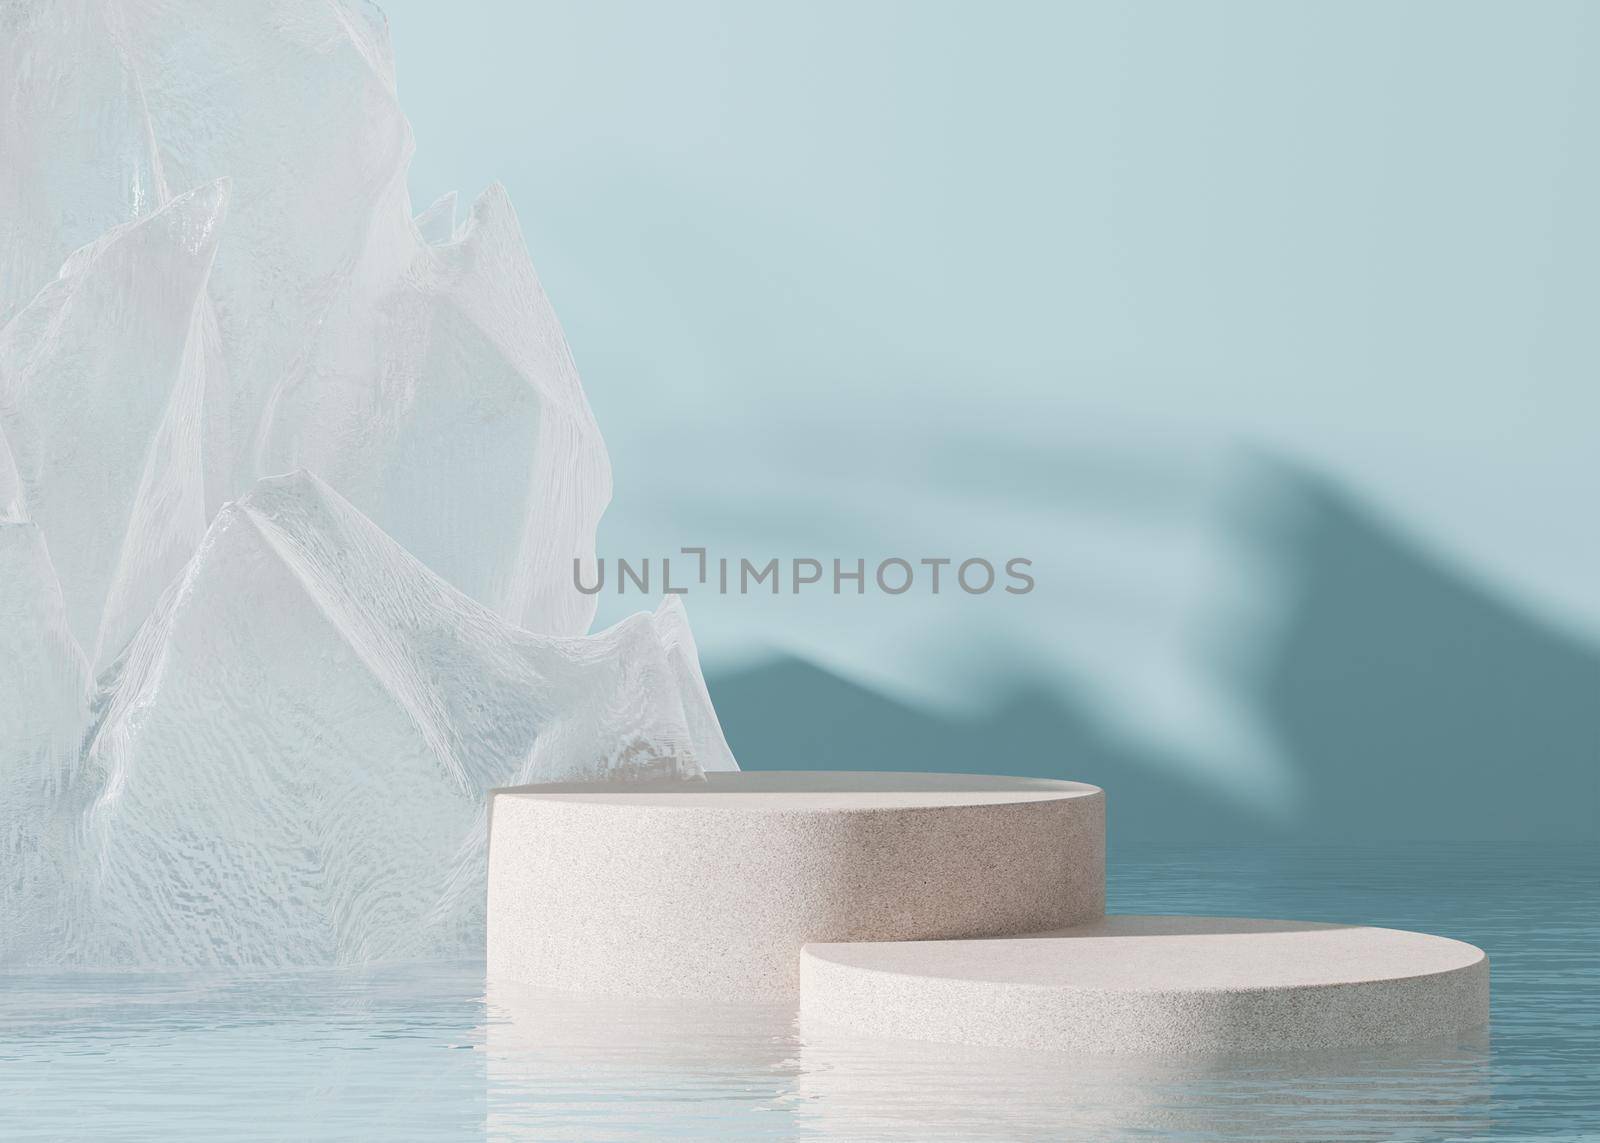 Two podiums standing in water, with abstract ice or crystal form on blue background. Mock up for product, cosmetic presentation. Pedestal or platform for beauty products. Empty scene, stage. 3D render by creativebird